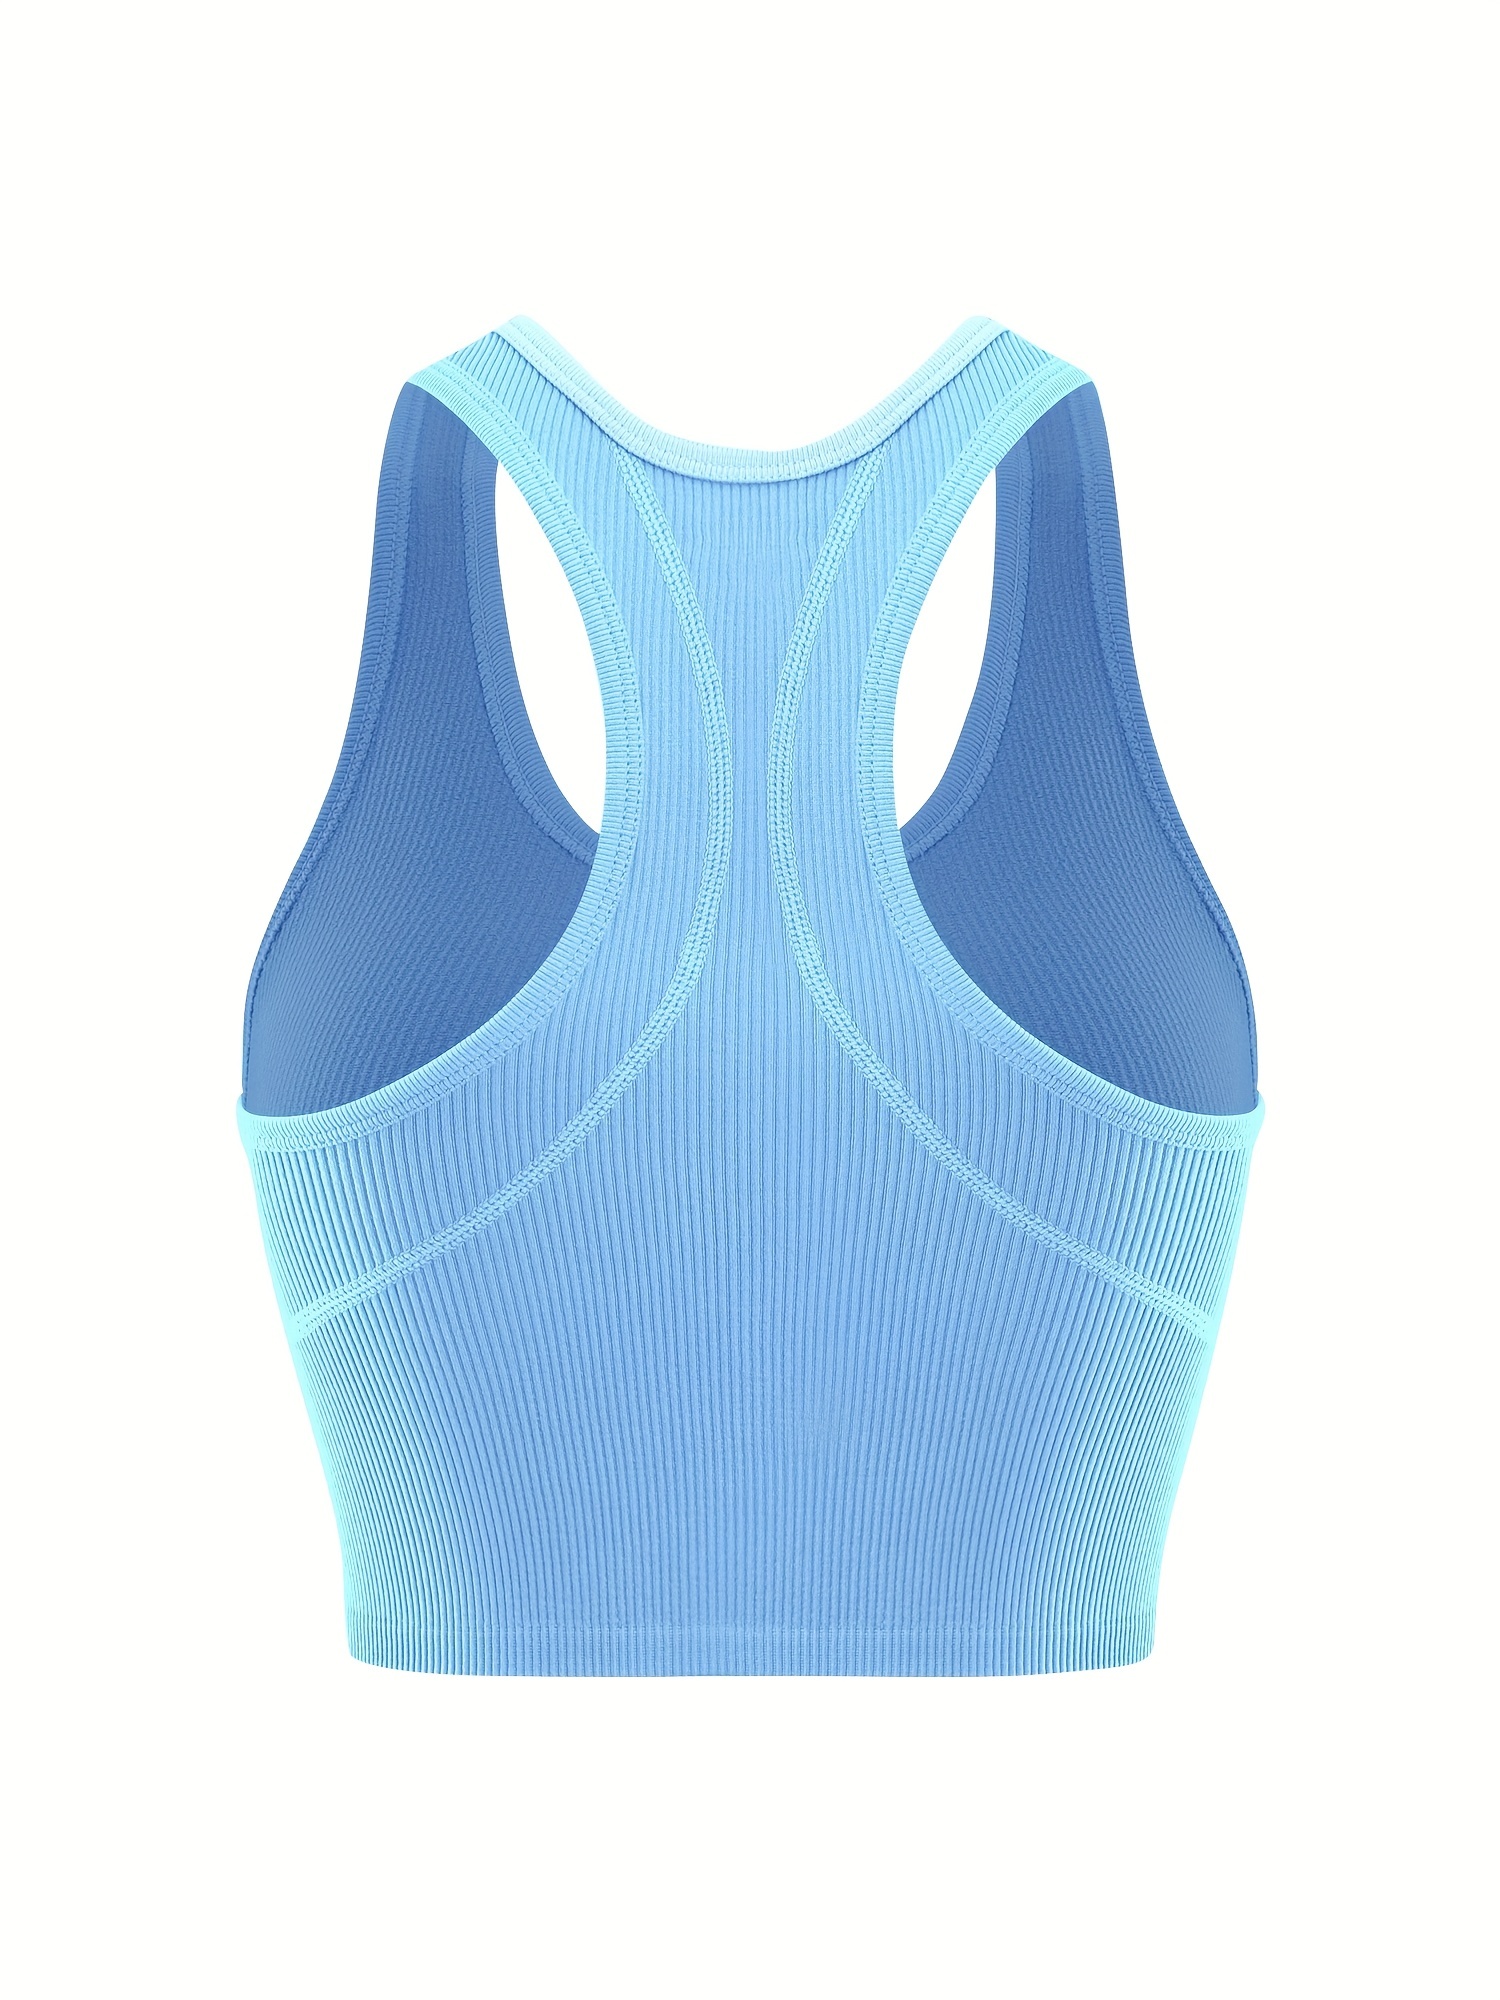 Sports Bra for Women 70s Bra Yoga Crop Tank Tops Fitness Workout Running  Top Casual Fitness Tank Tops at  Women's Clothing store